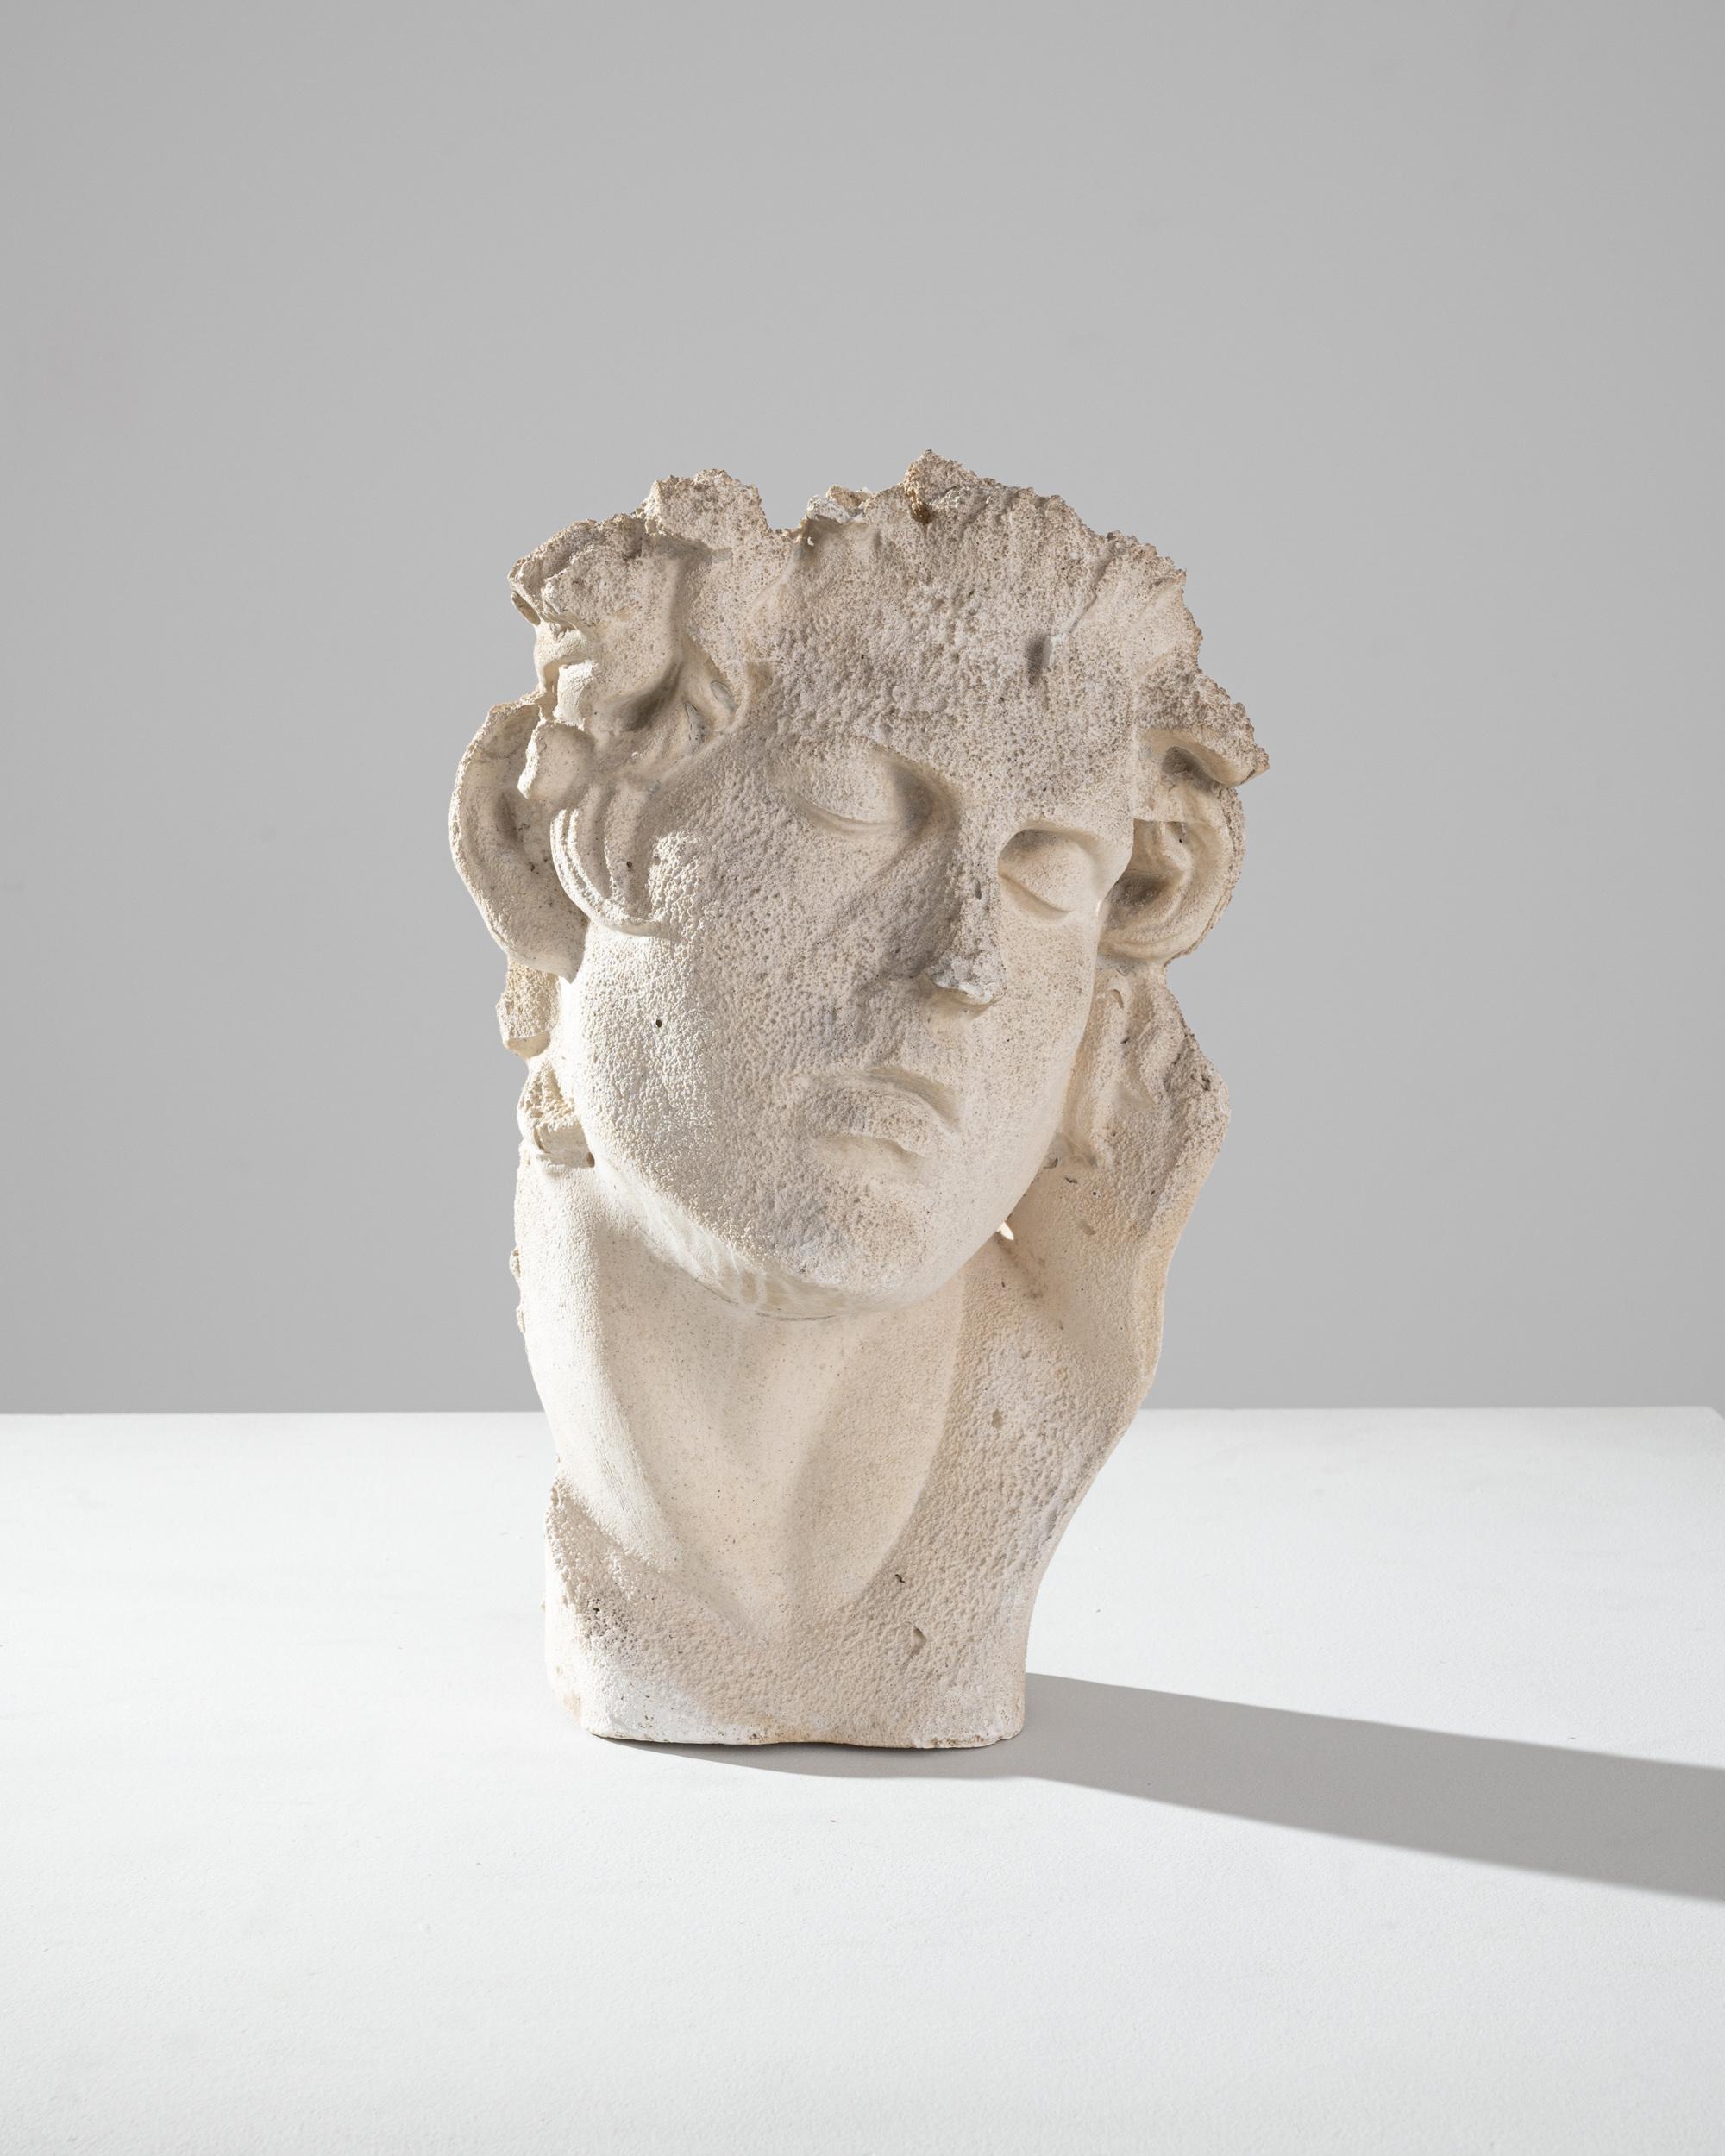 This vintage plaster sculpture depicts the head of a beautiful youth, staring into the distance with a melancholy expression. Made in France in the 20th century, the style emulates that of ancient Greek and Roman statues. The features of the face